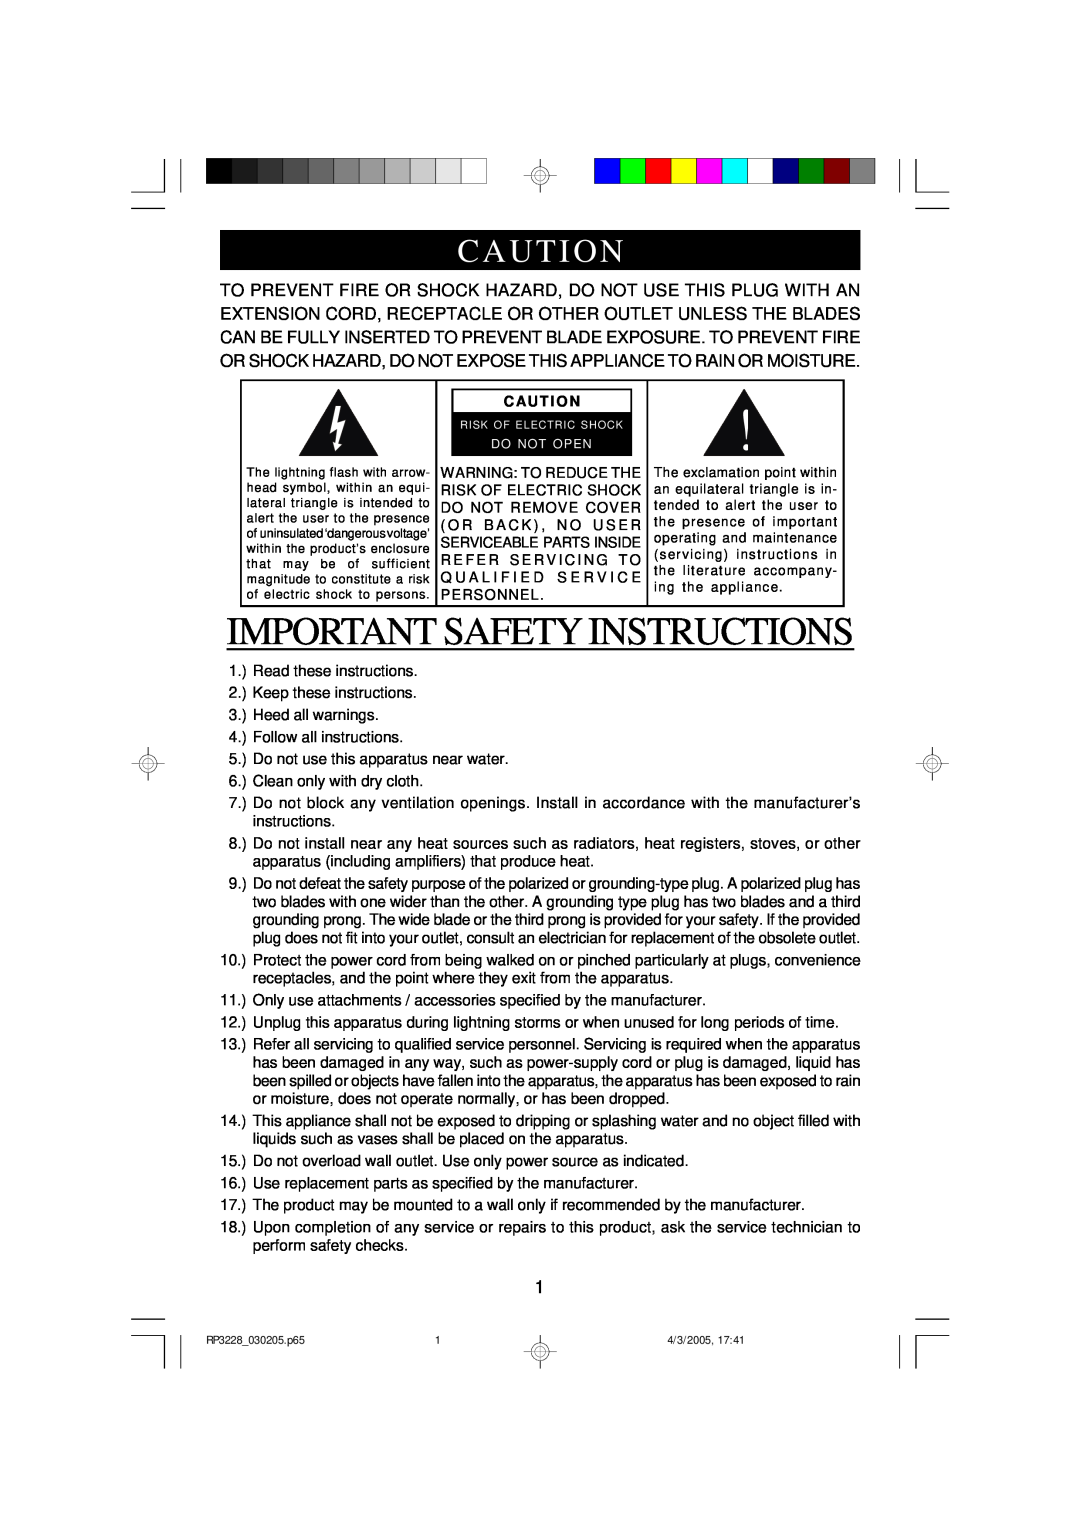 Emerson RP3228SL owner manual Important Safety Instructions, Caut I On, Caut I O N 